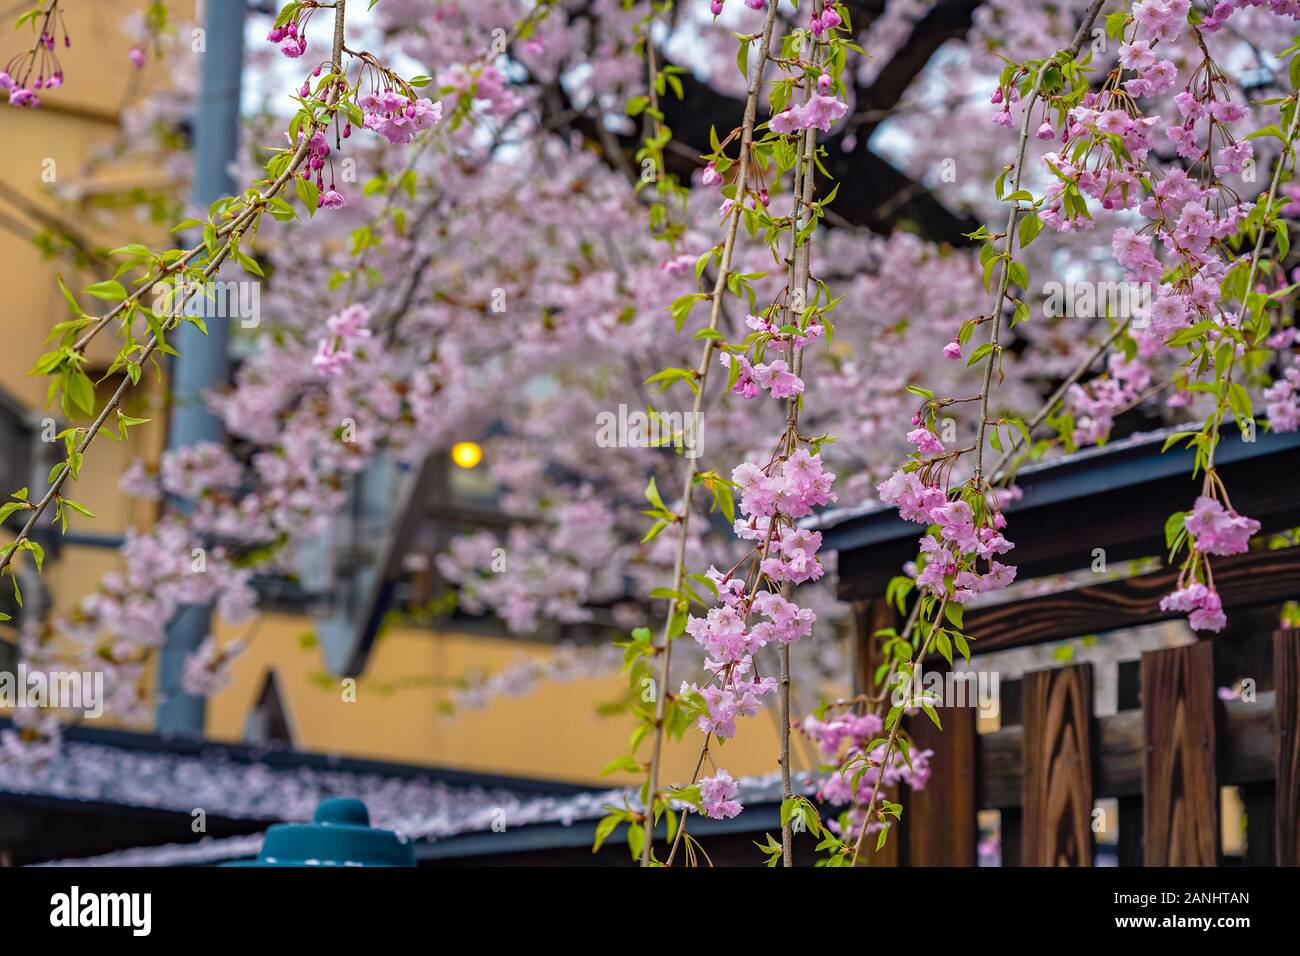 close up cherry blossom flowers with traditional Japanese architecture roof In the background Stock Photo